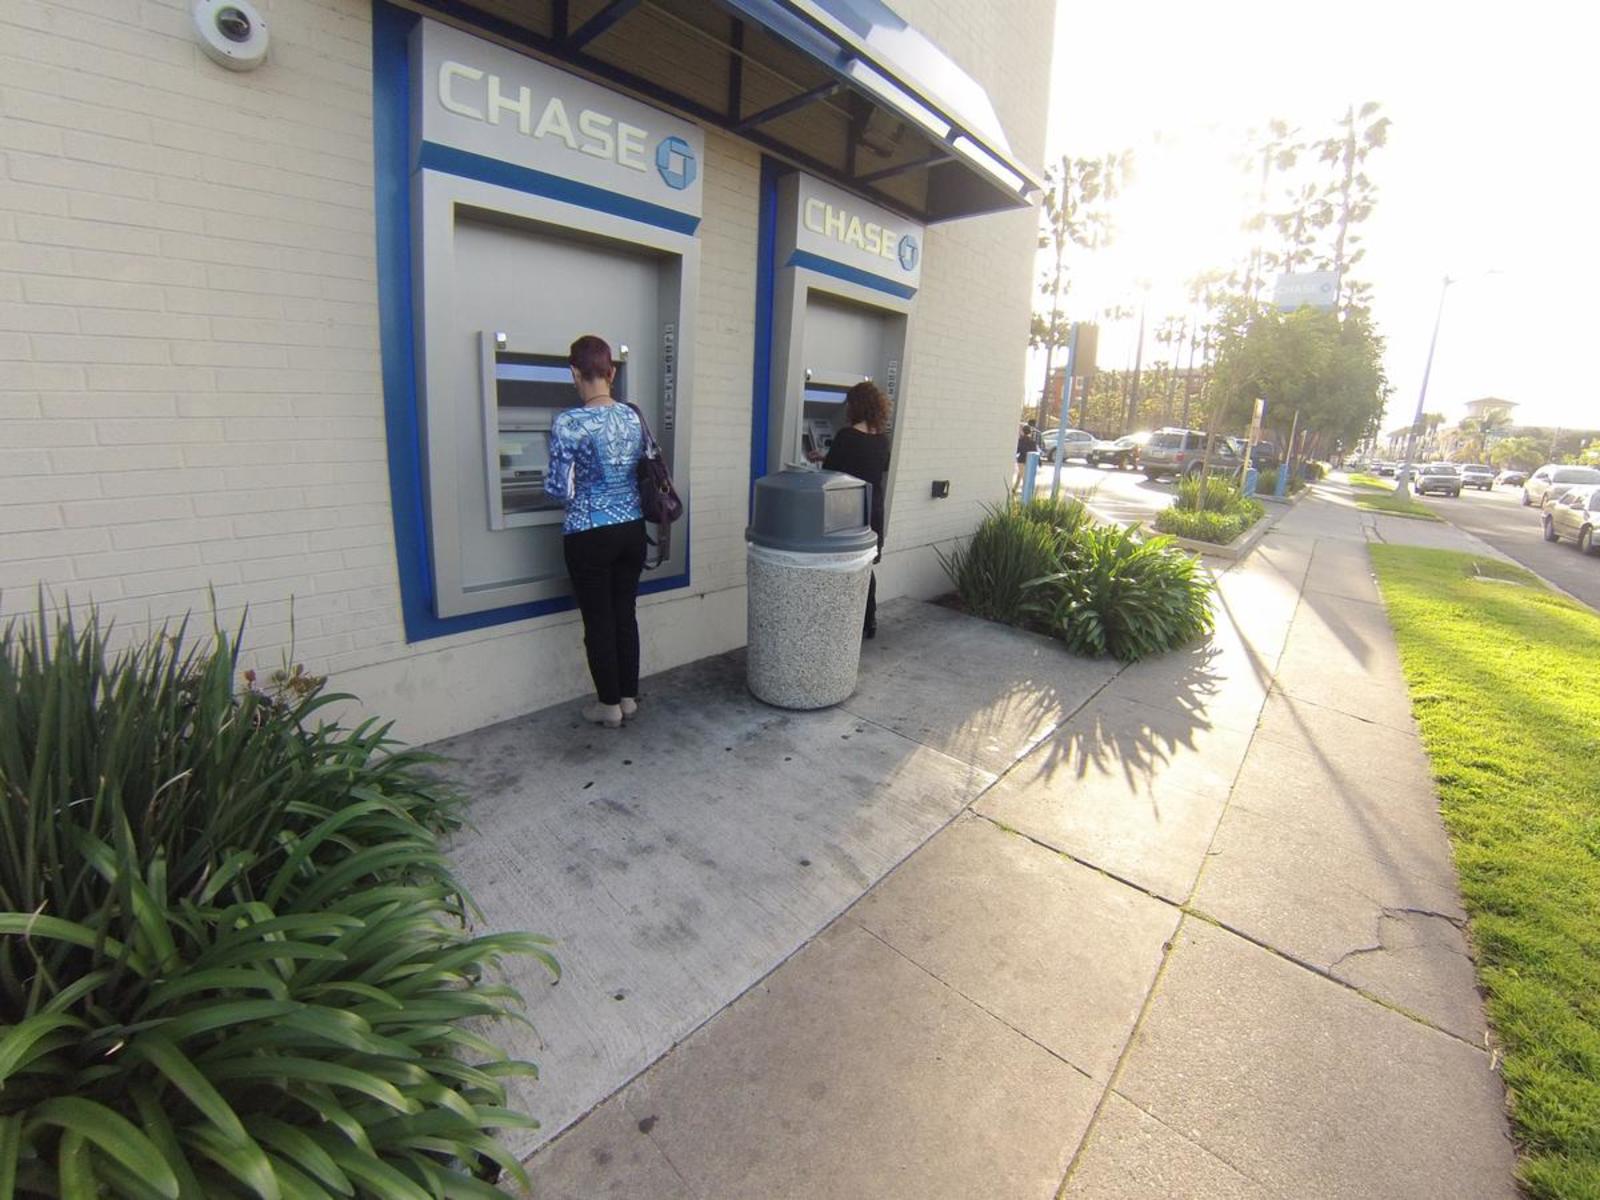 Two people using Chase ATM